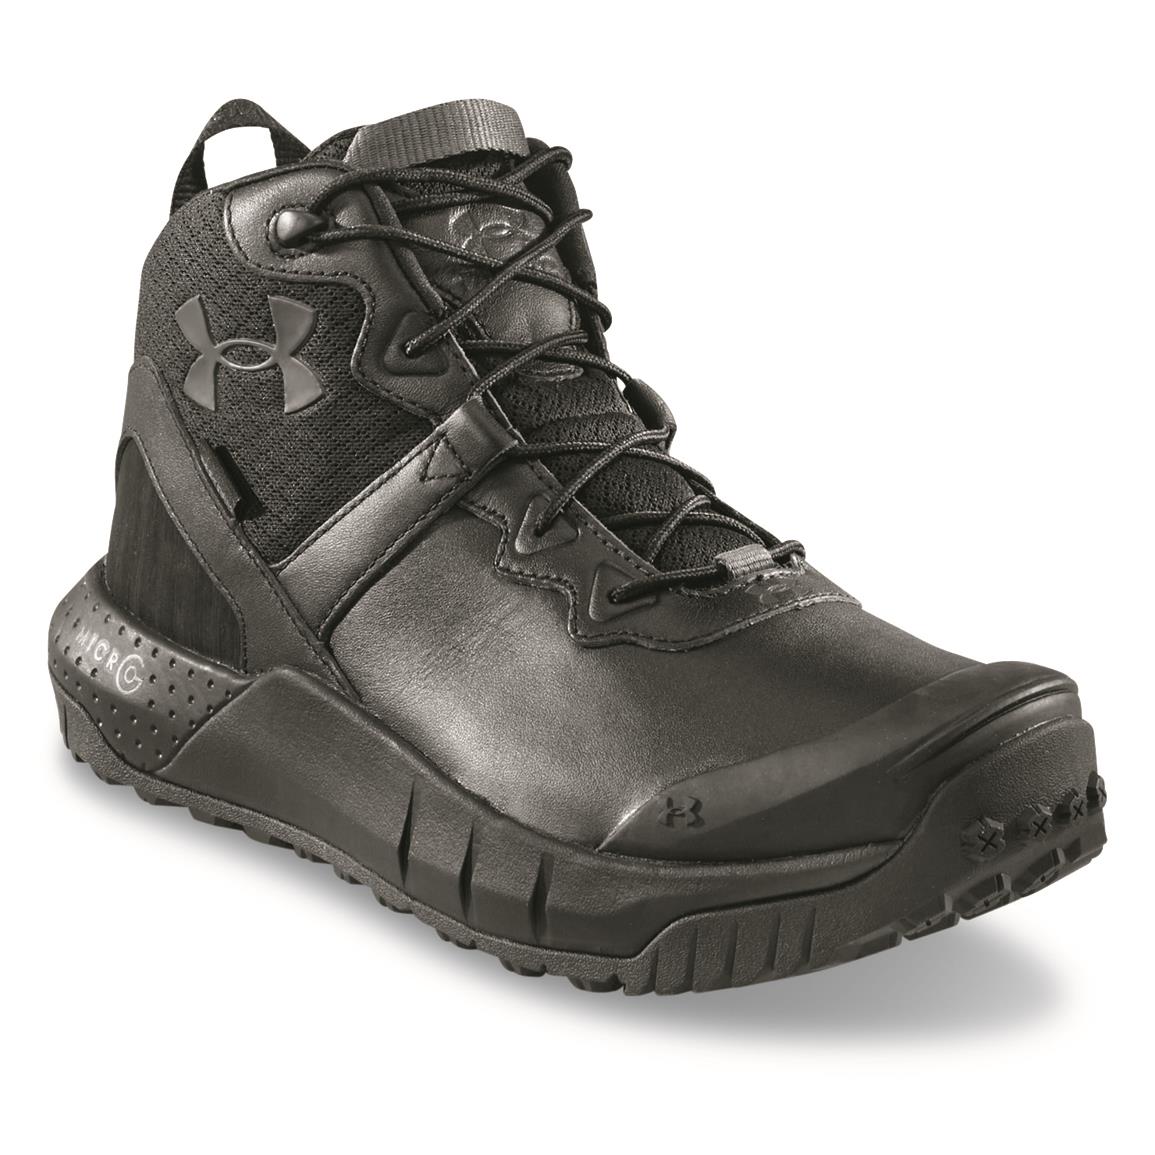 Under Armour Micro G Valsetz Waterproof Leather Tactical Boots, Black/black/jet Gray